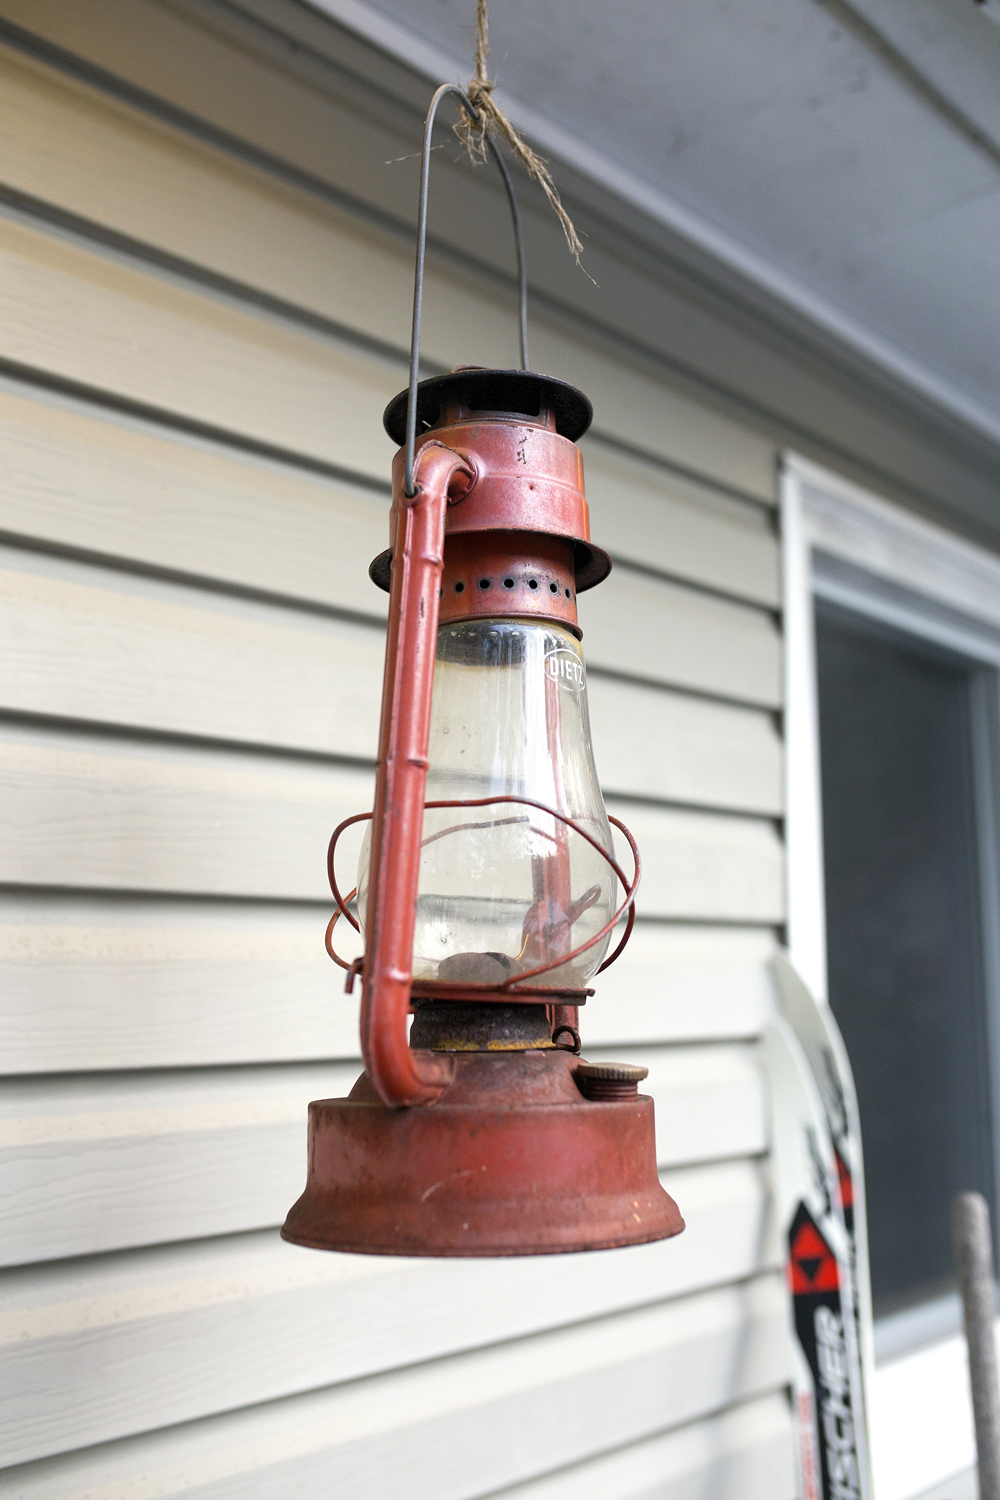 Oil lamp hanging outside home